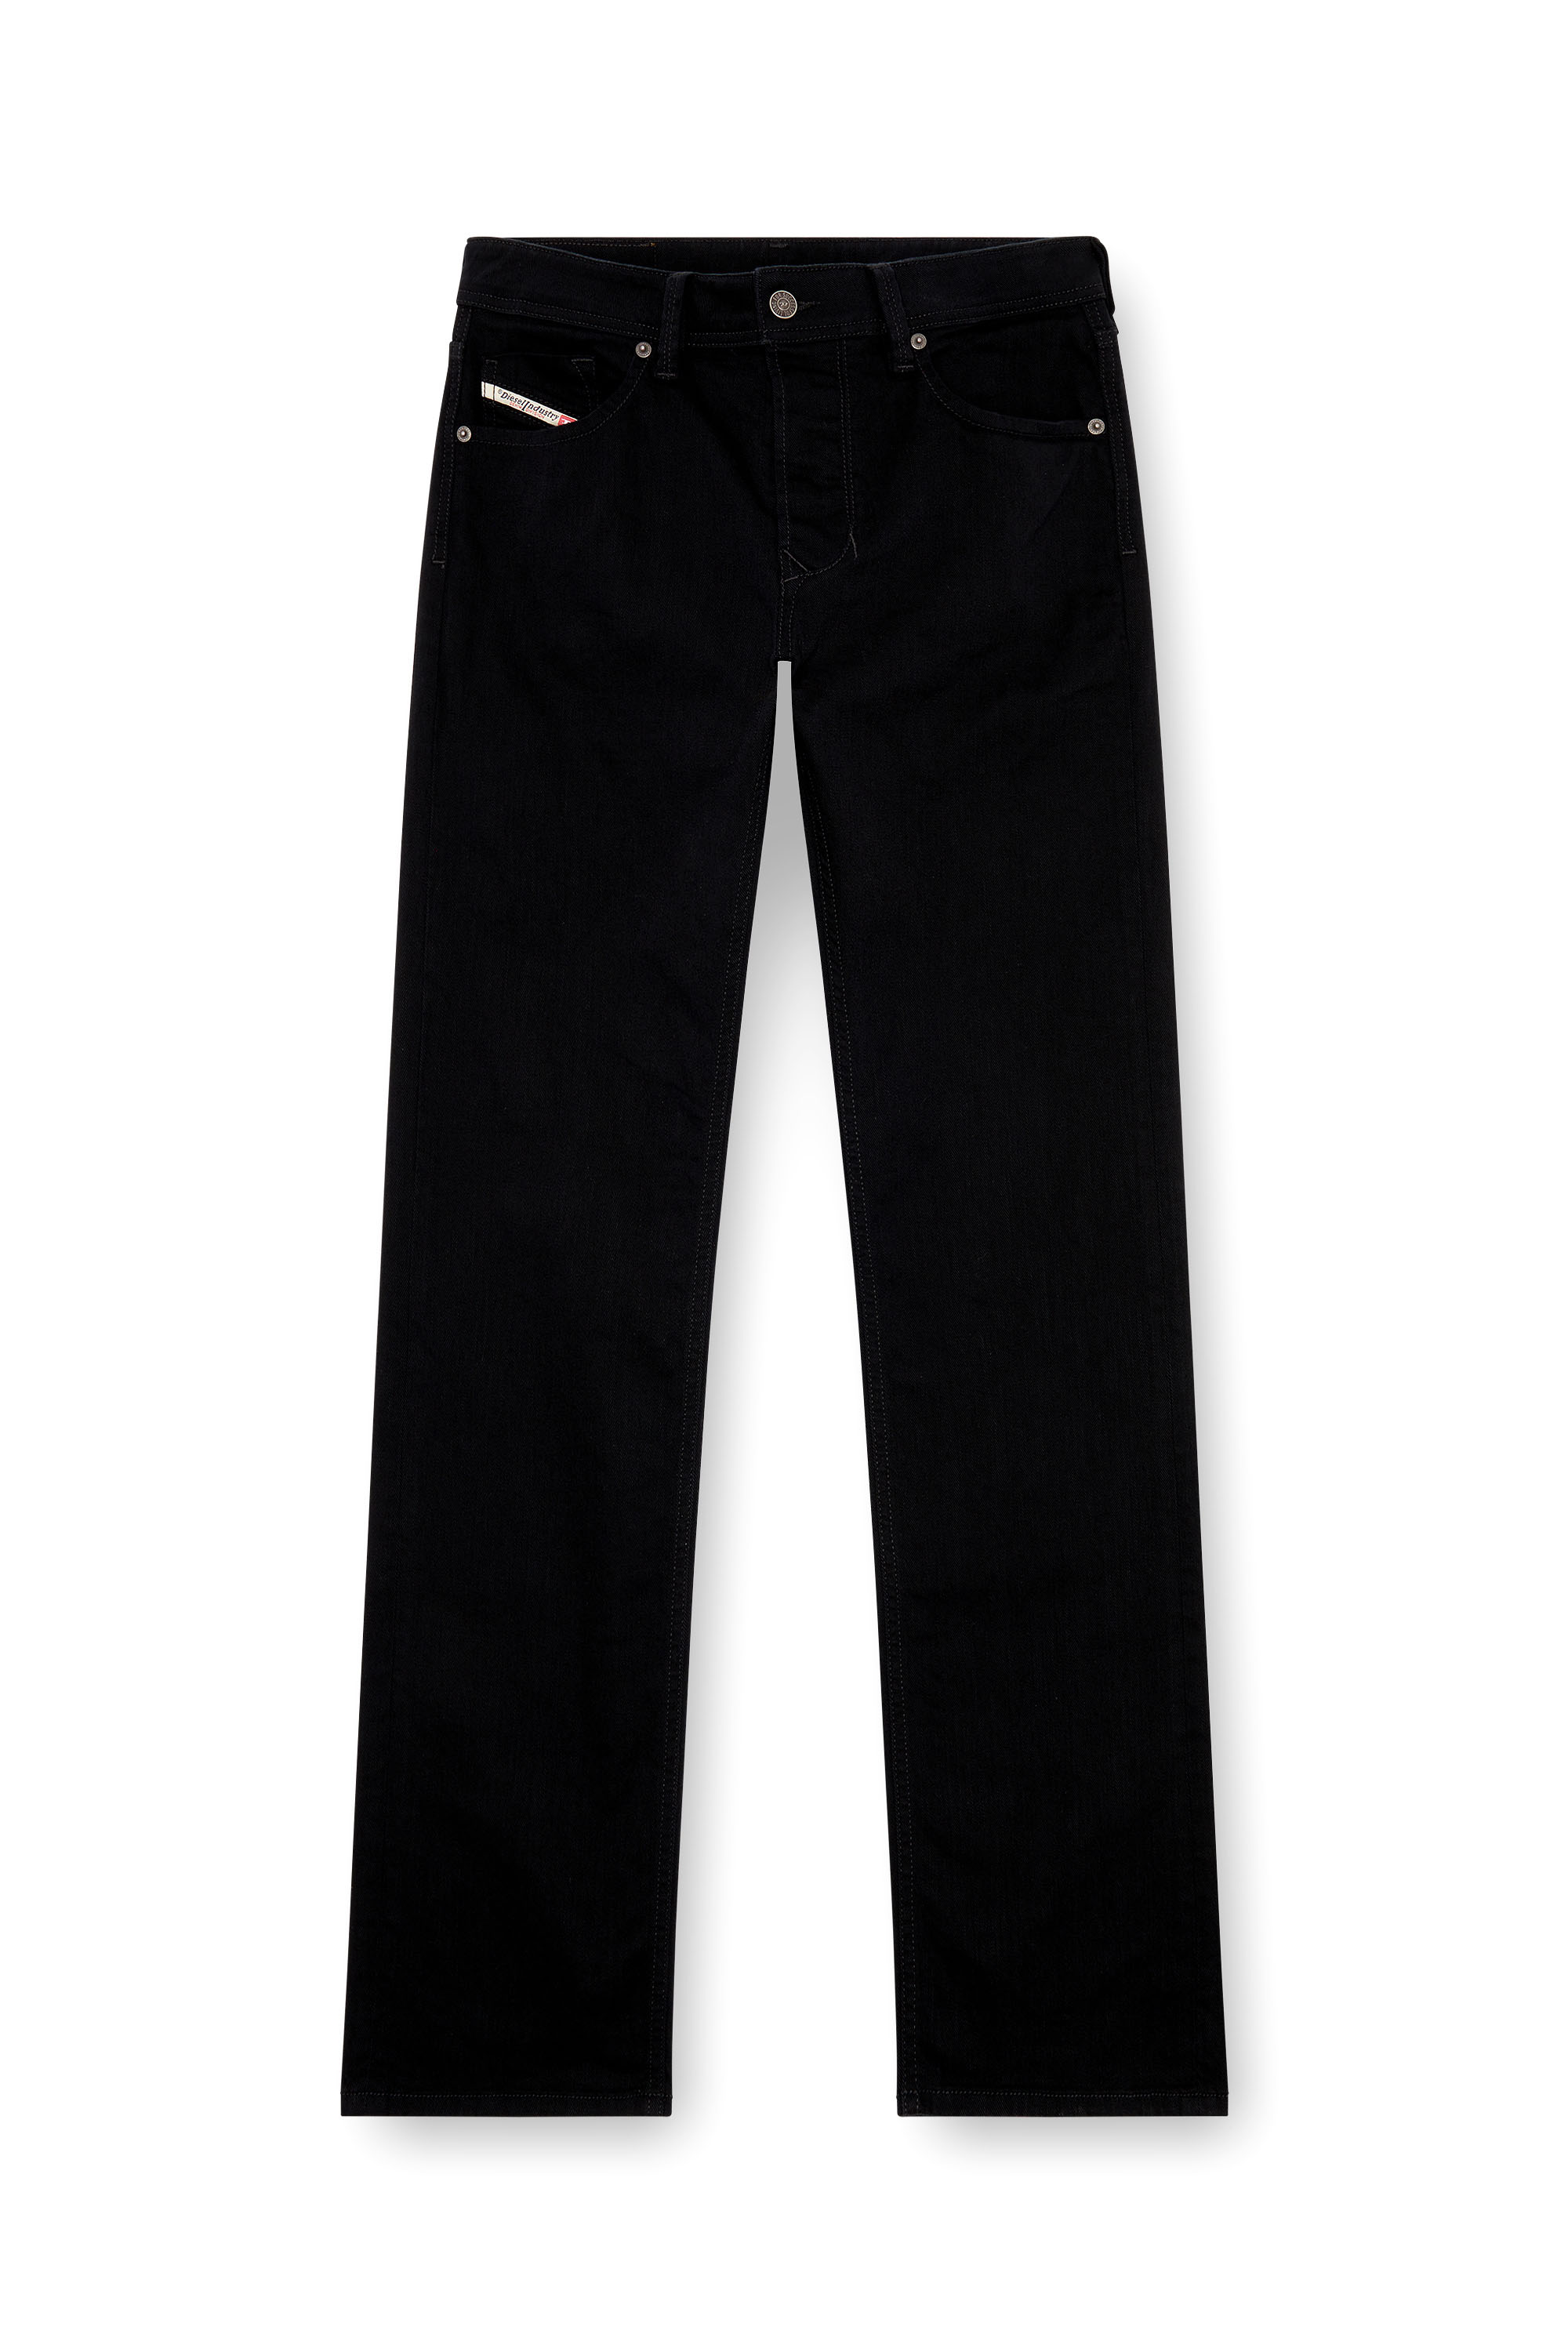 Diesel - Straight Jeans 1985 Larkee 0688H, Hombre Straight Jeans - 1985 Larkee in Negro - Image 3